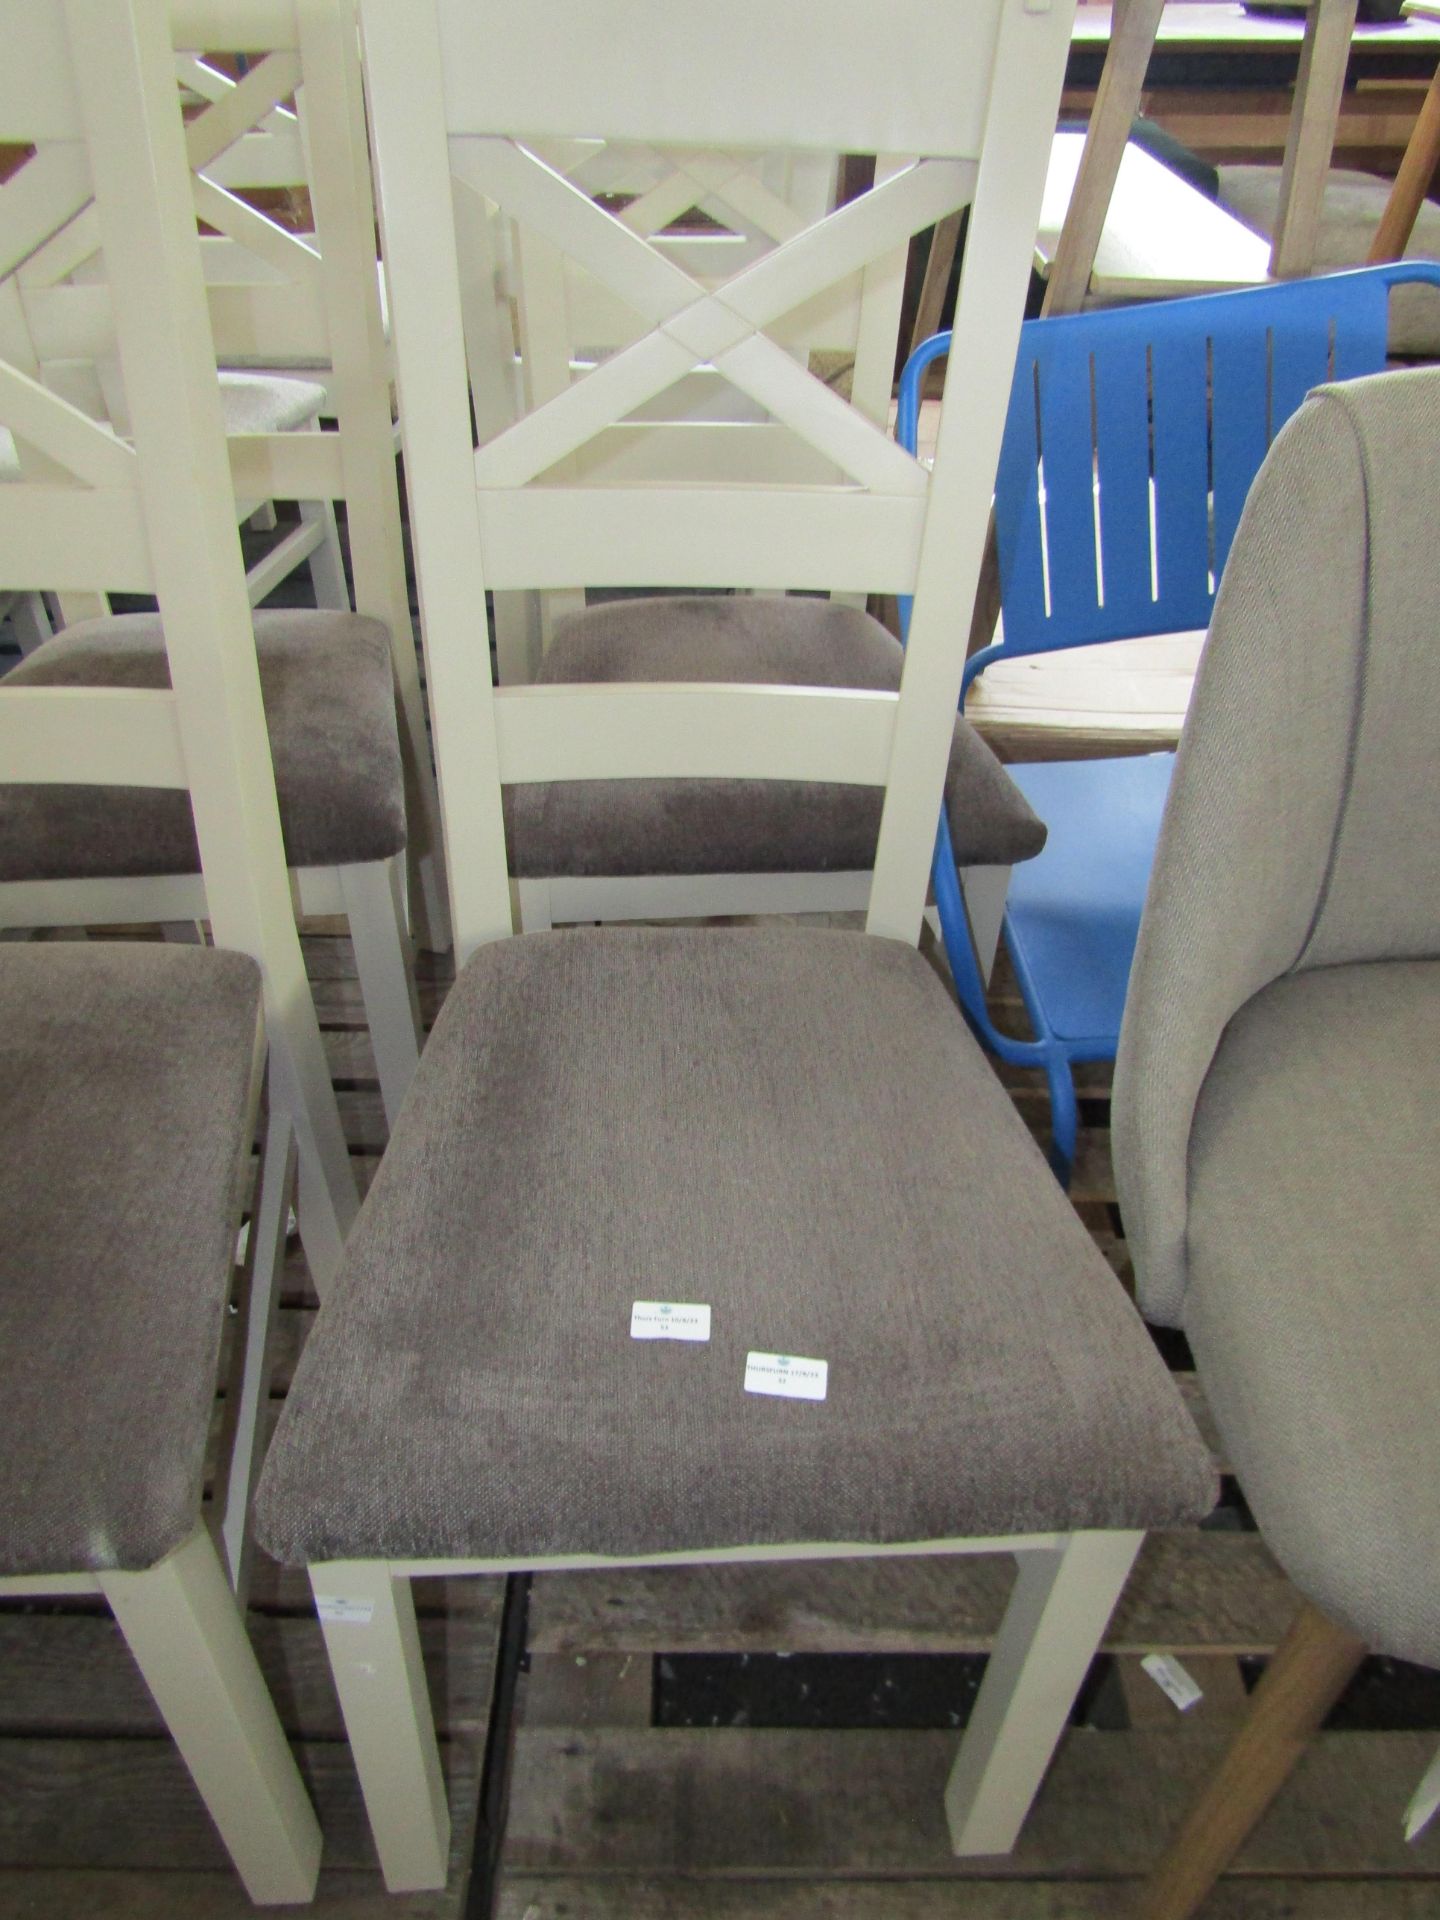 Oak Furnitureland Shay Painted Chair with Plain Charcoal Fabric Seat RRP Â£340.00 - Image 2 of 2